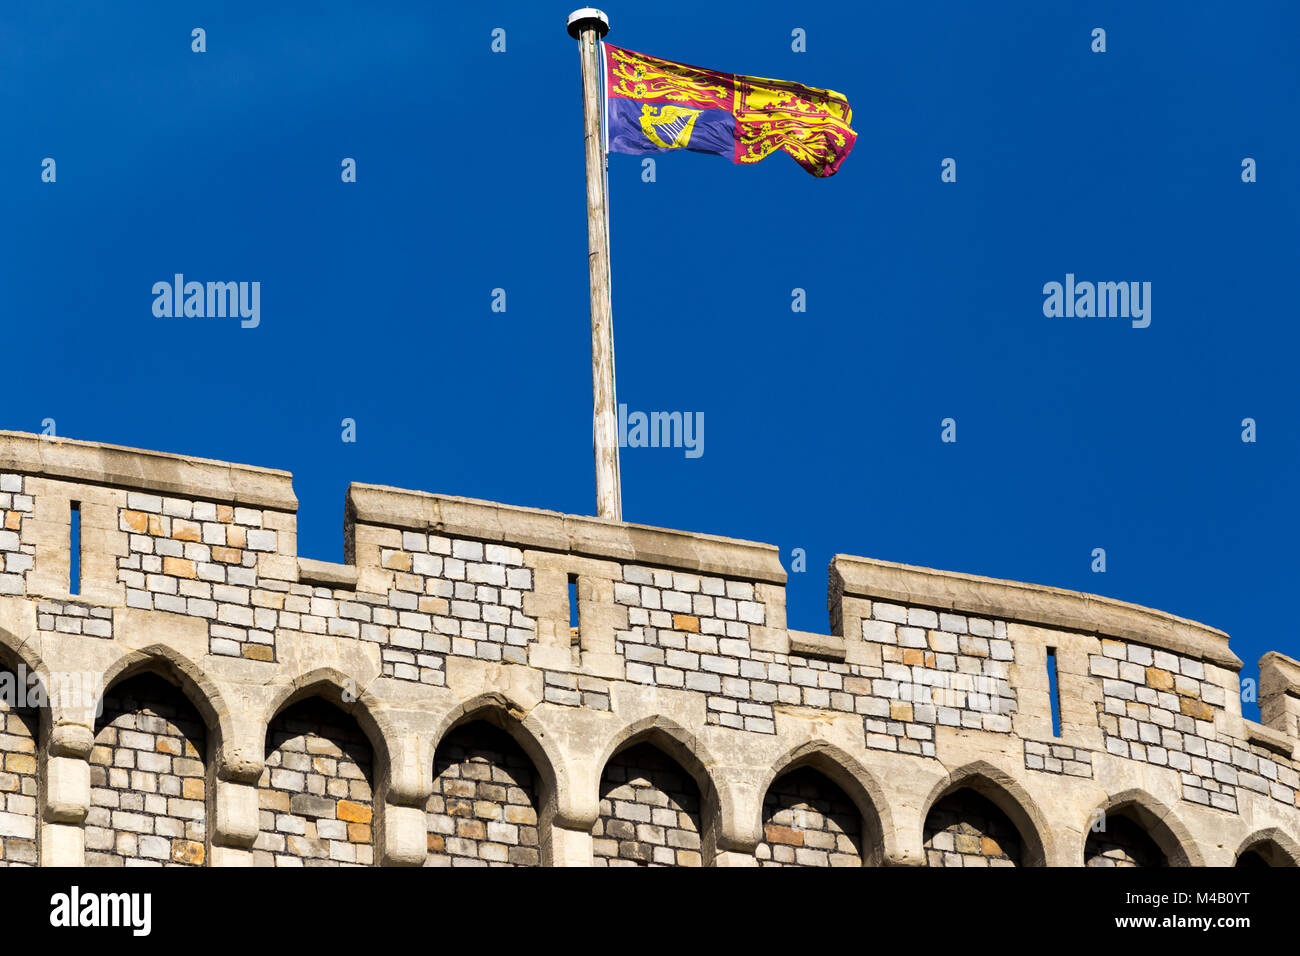 The Royal Standard flag flying on / from a flagpole / pole at Windsor Castle, UK. It is flown at royal residences only when the sovereign is present. Stock Photo